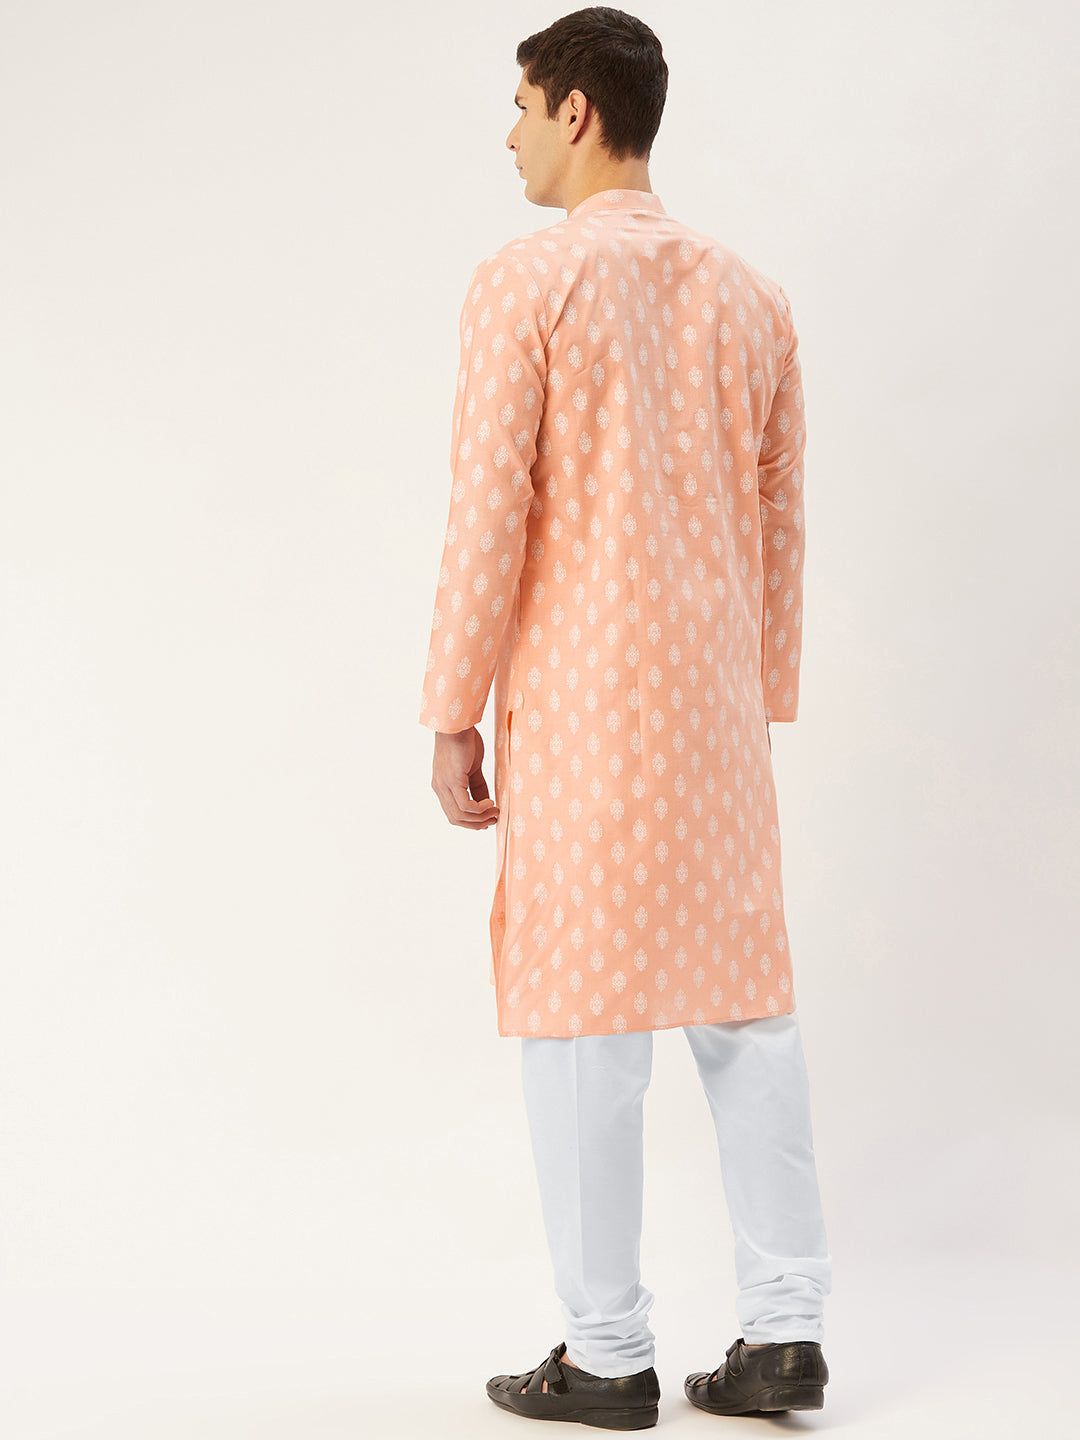 Jompers Men's Peach Cotton Floral printed kurta Only